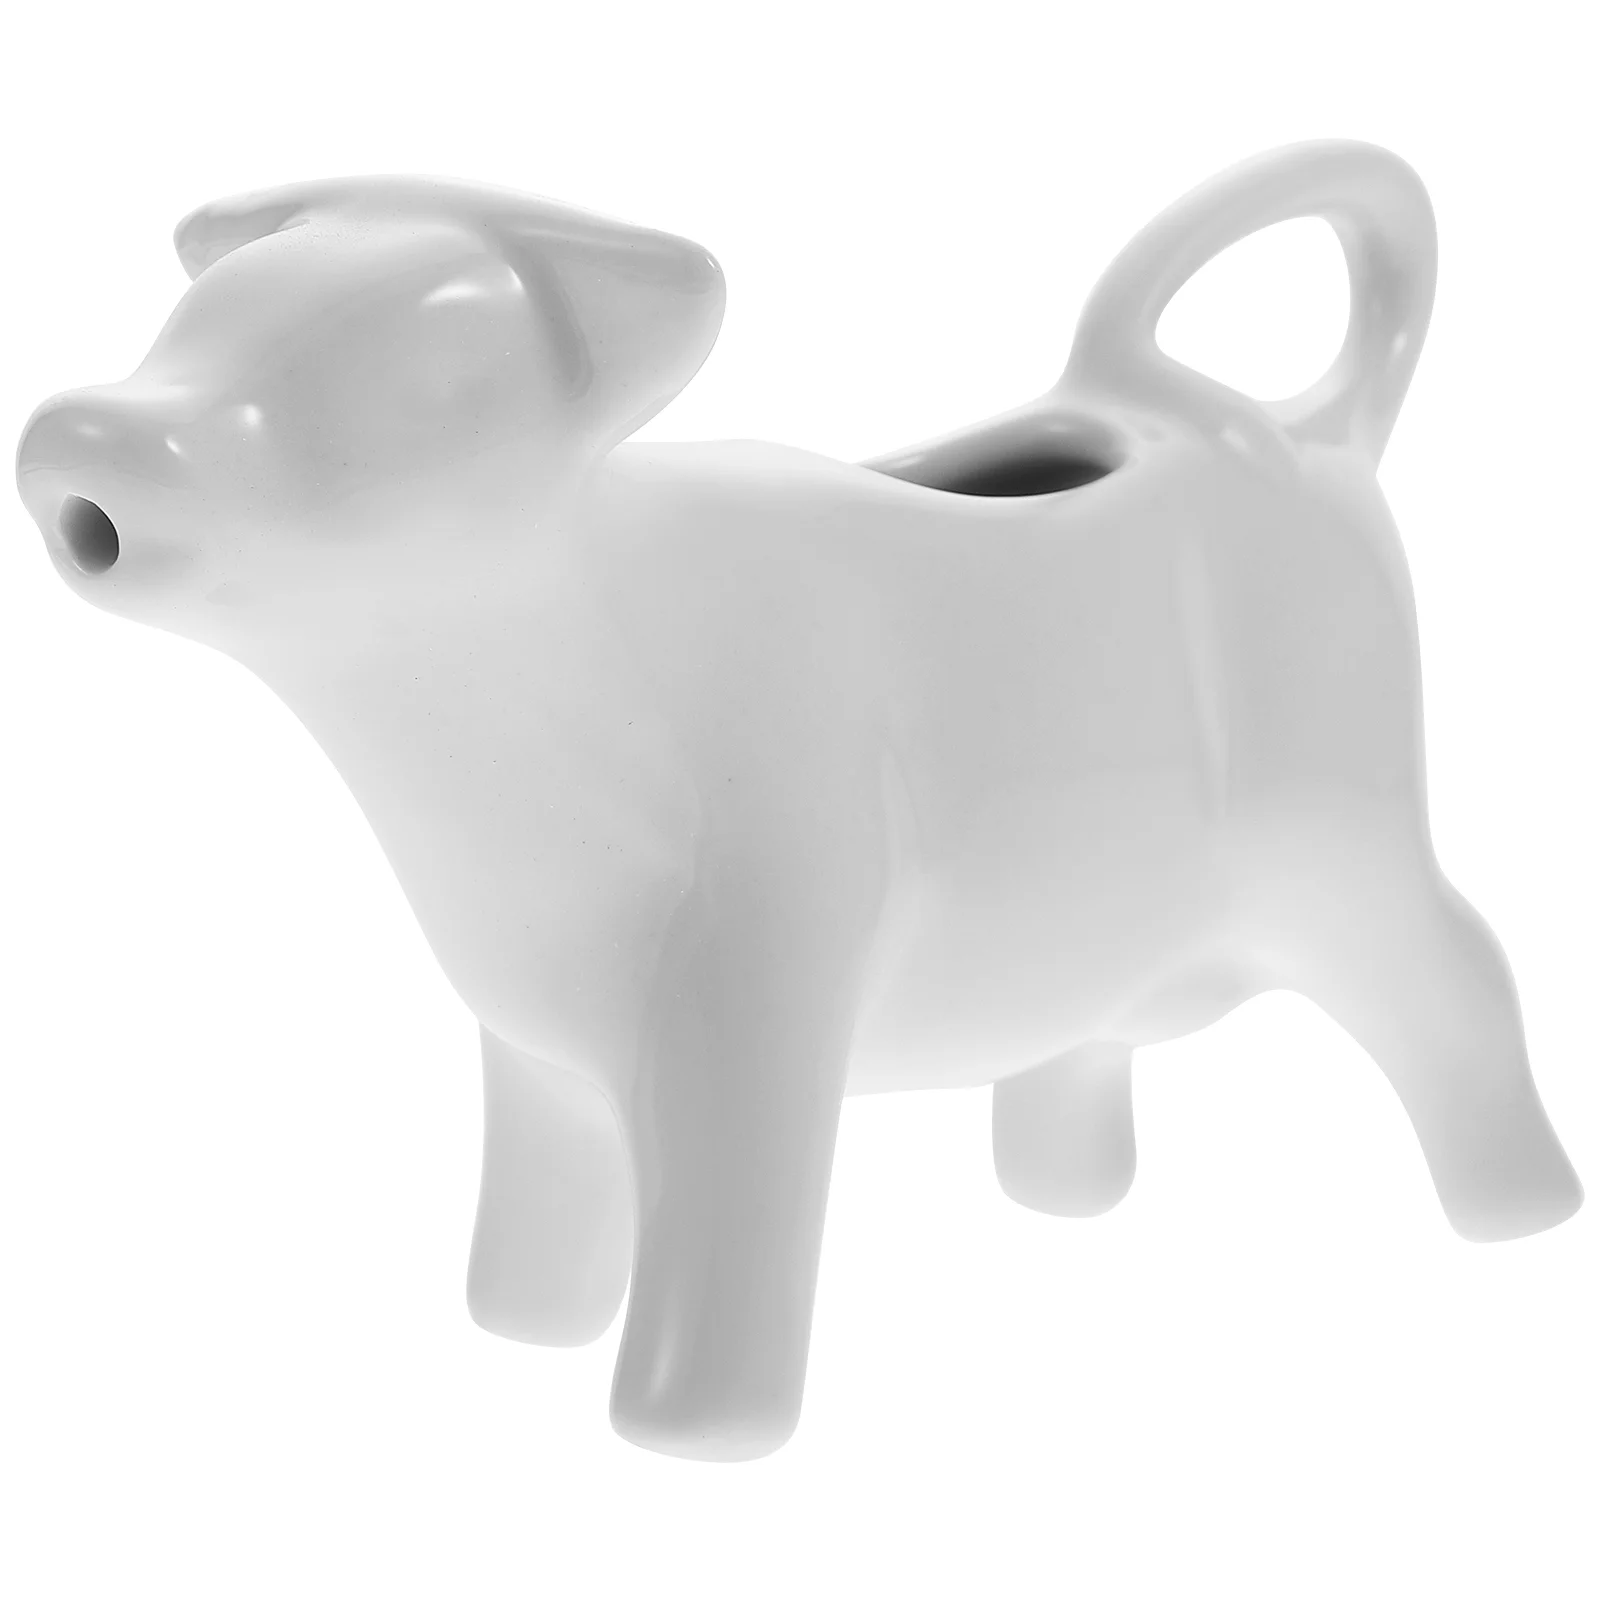 

White Ceramic Sauce Dipping Bowl: Cow Shaped Sugar Dish Sauce Dipping Bowl with Handle Gravy Pourer Salad Dressings for Home